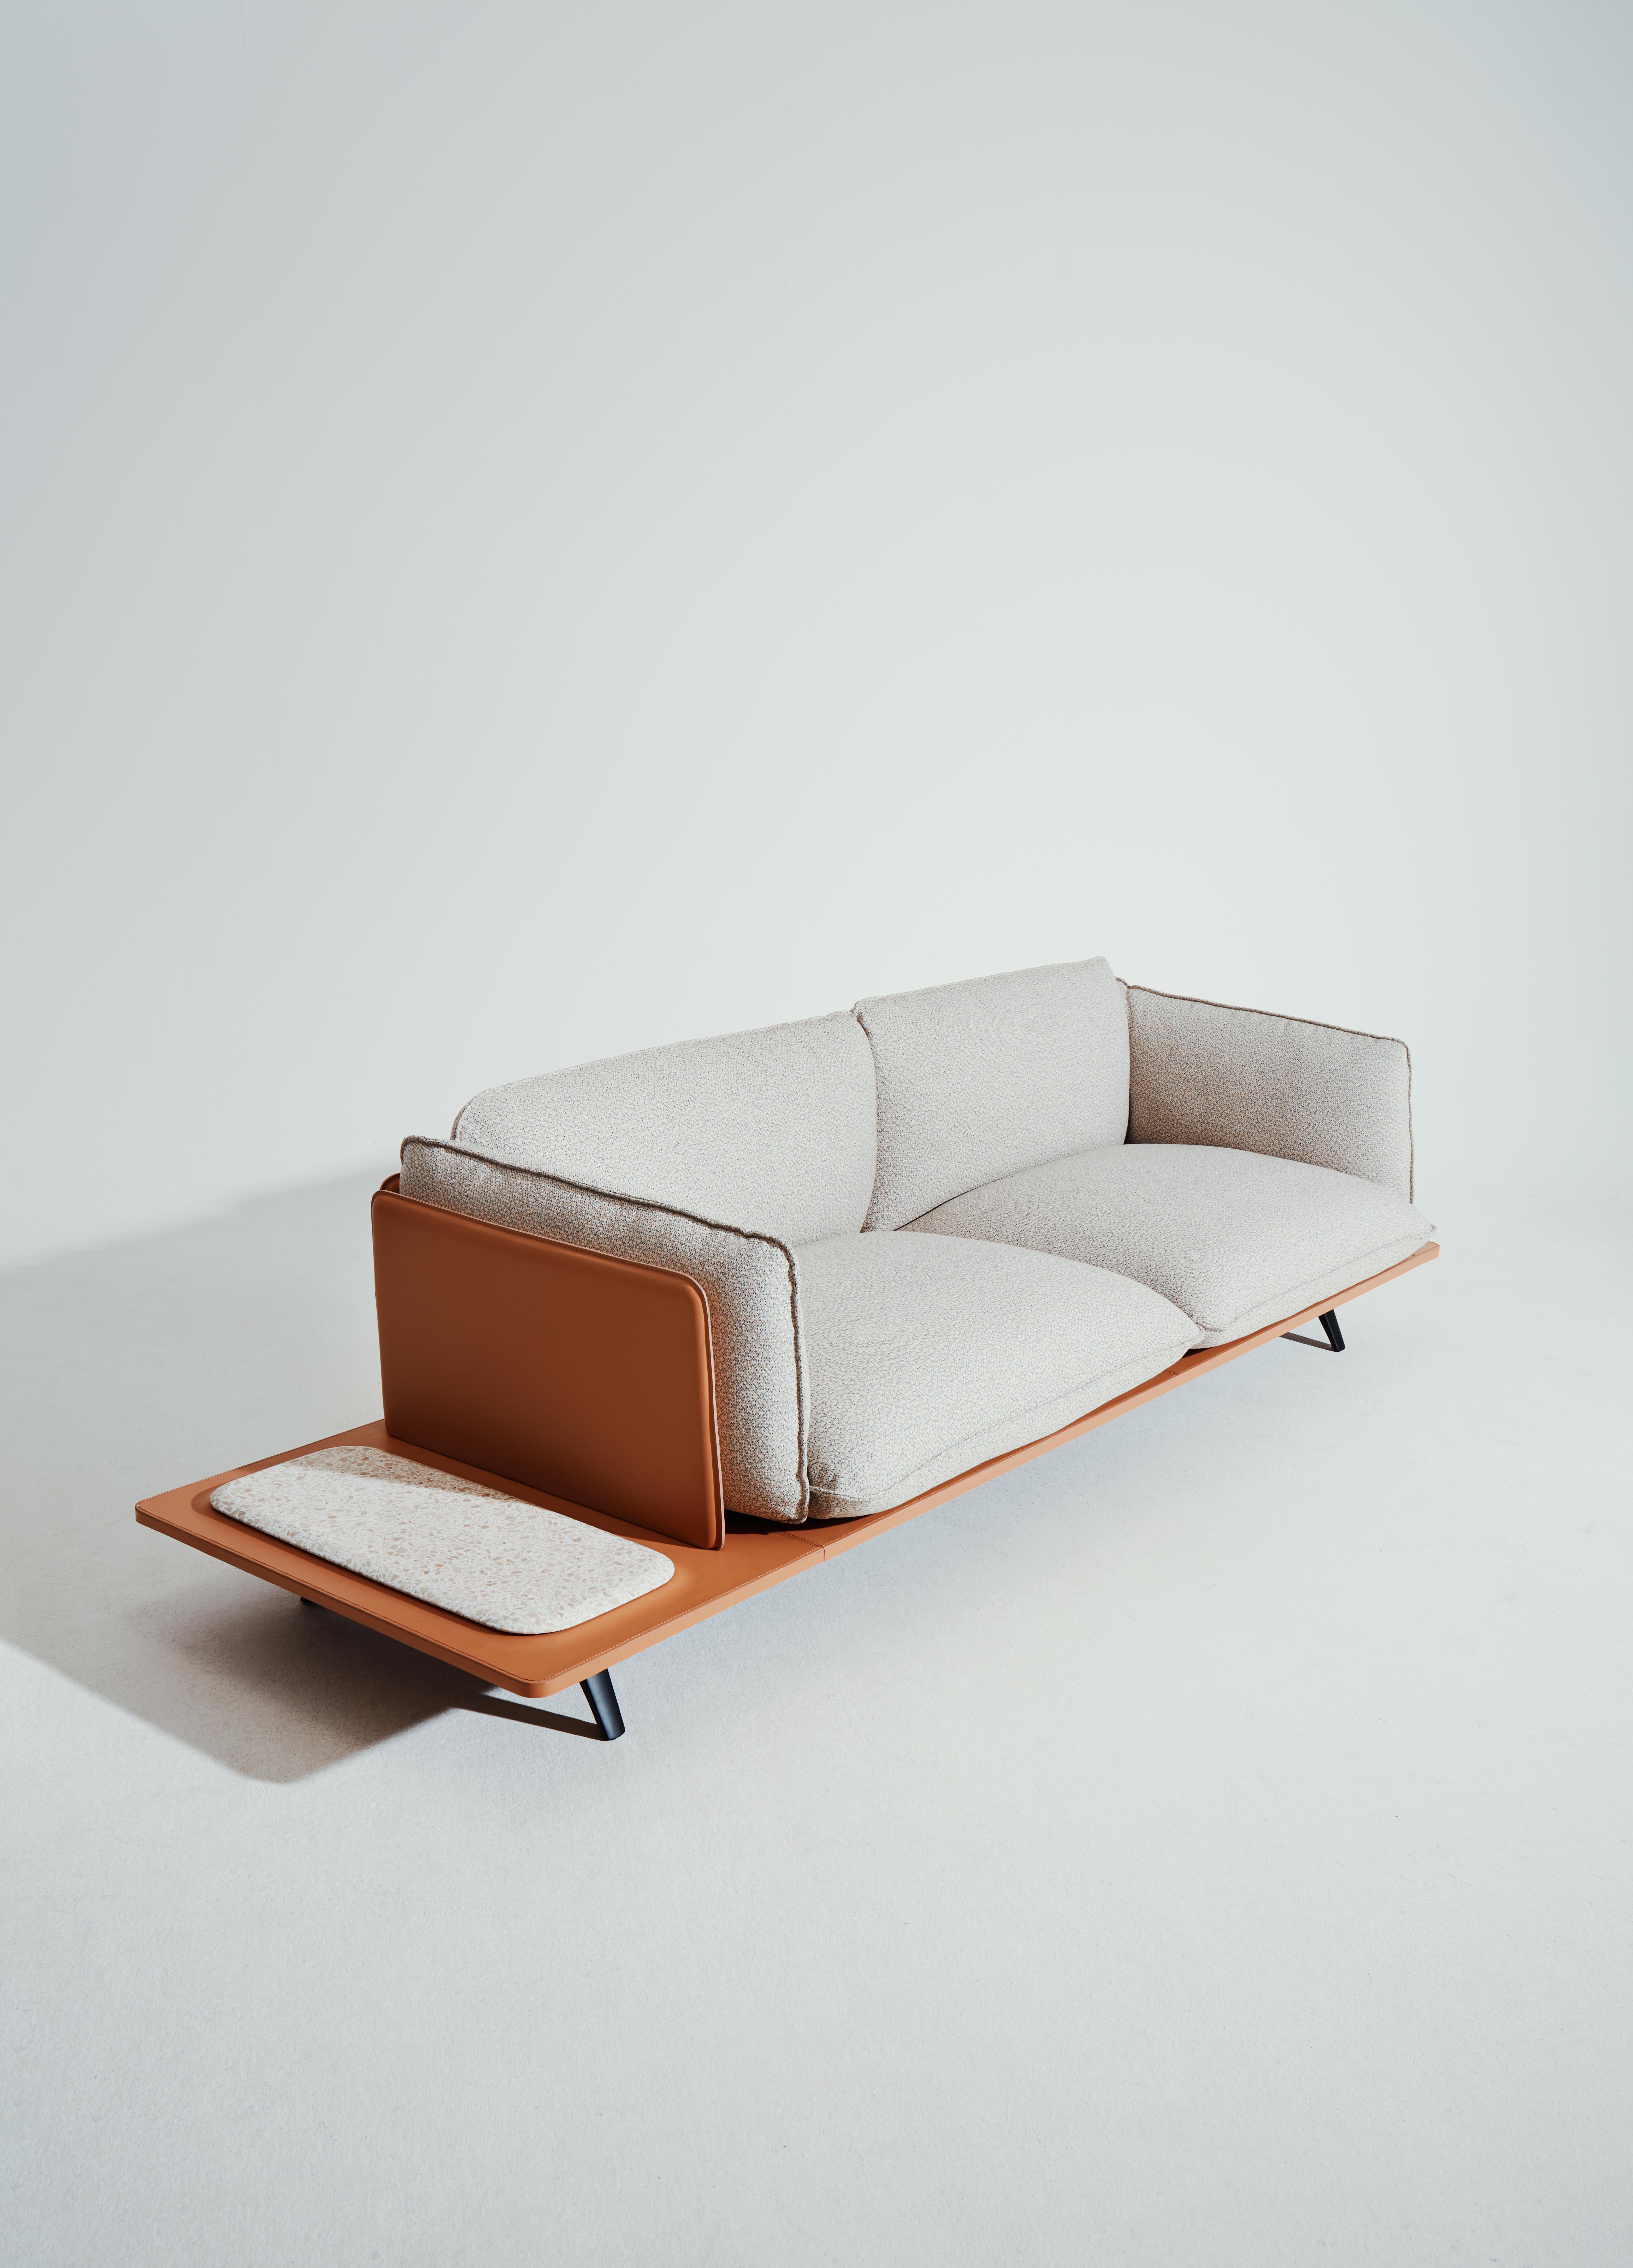 Sahara sofa by Noé Duchaufour Lawrance
Modular sofa 2 seats + top
Dimensions: W 273.8 x W 87.9 x H 83 cm
Materials: Fabric or leather, Black aluminium, powder coat structure, Mdf lacquered base, Leather back panels

The design of the ‘Sahara’